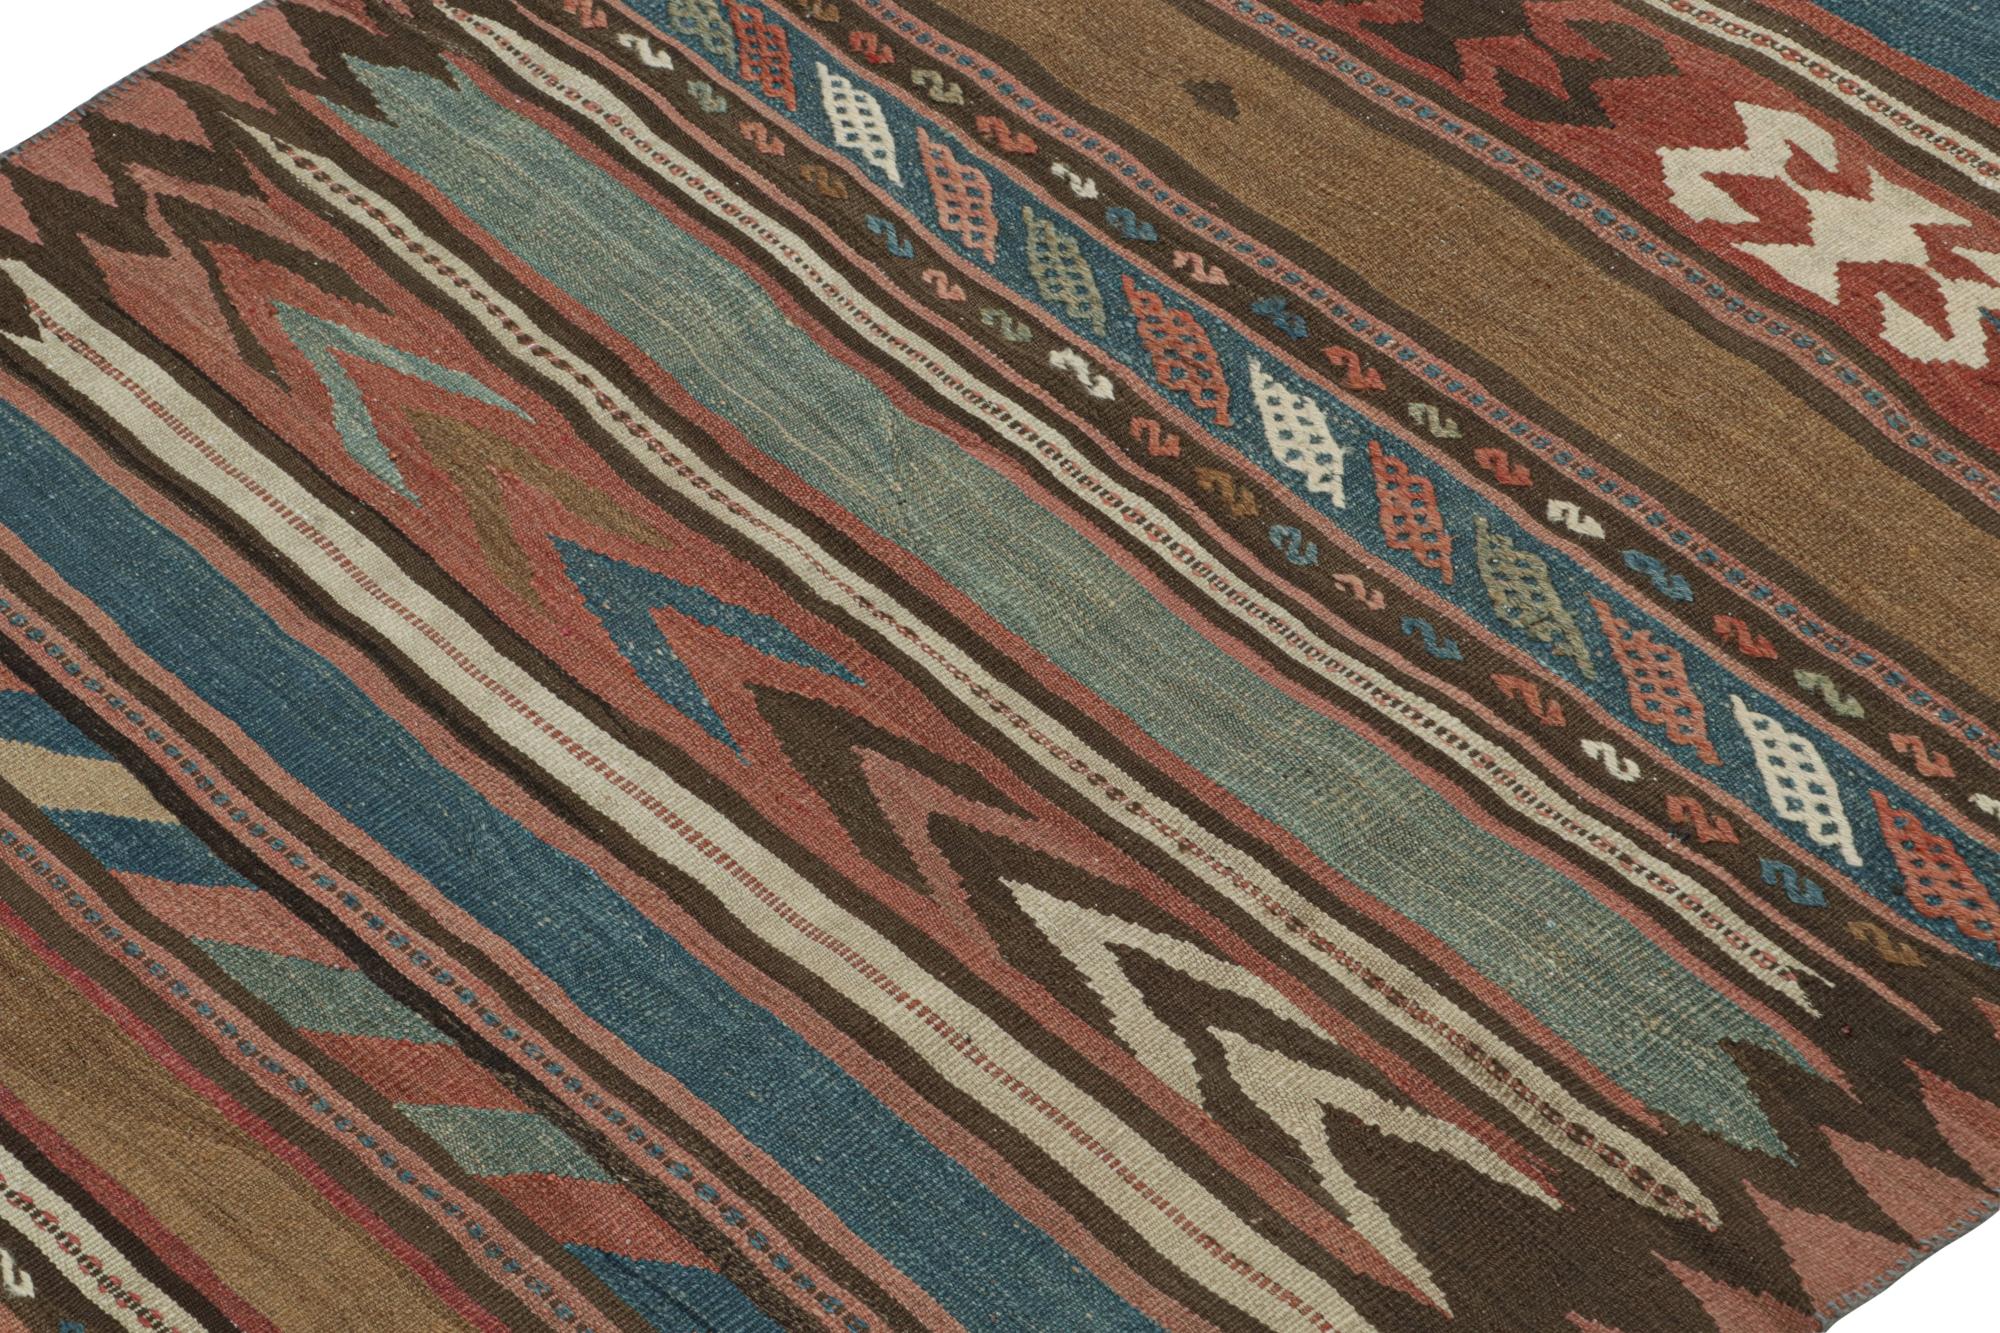 This vintage 4x5 Persian Kilim is a new addition of Bidjar provenance in Rug & Kilim's rare tribal curations. Handwoven in wool circa 1950-1960.

On the Design: 

Bidjar Kilims like this are reputed for their durability and distinct nomadic